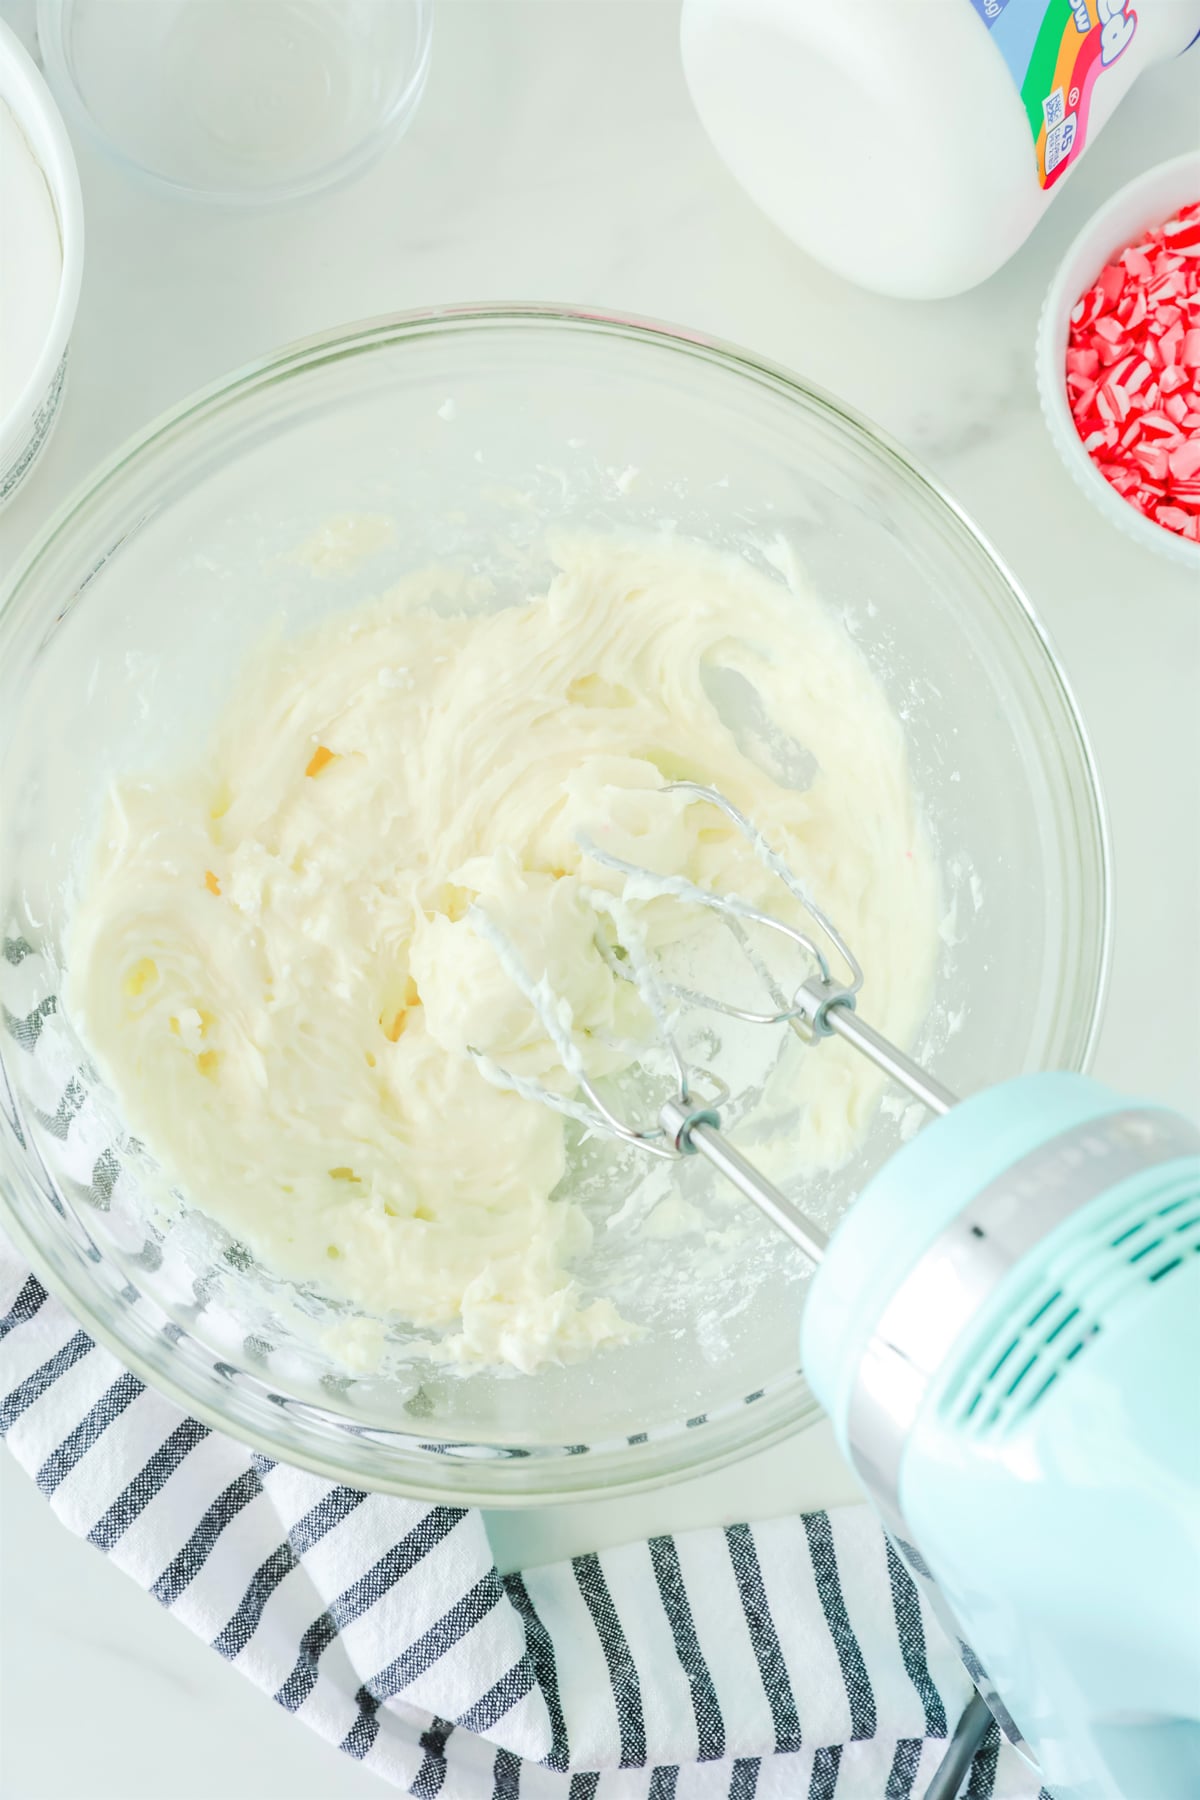 Mixing sugar and cream cheese in a bowl as one process of preparing Peppermint Fluff